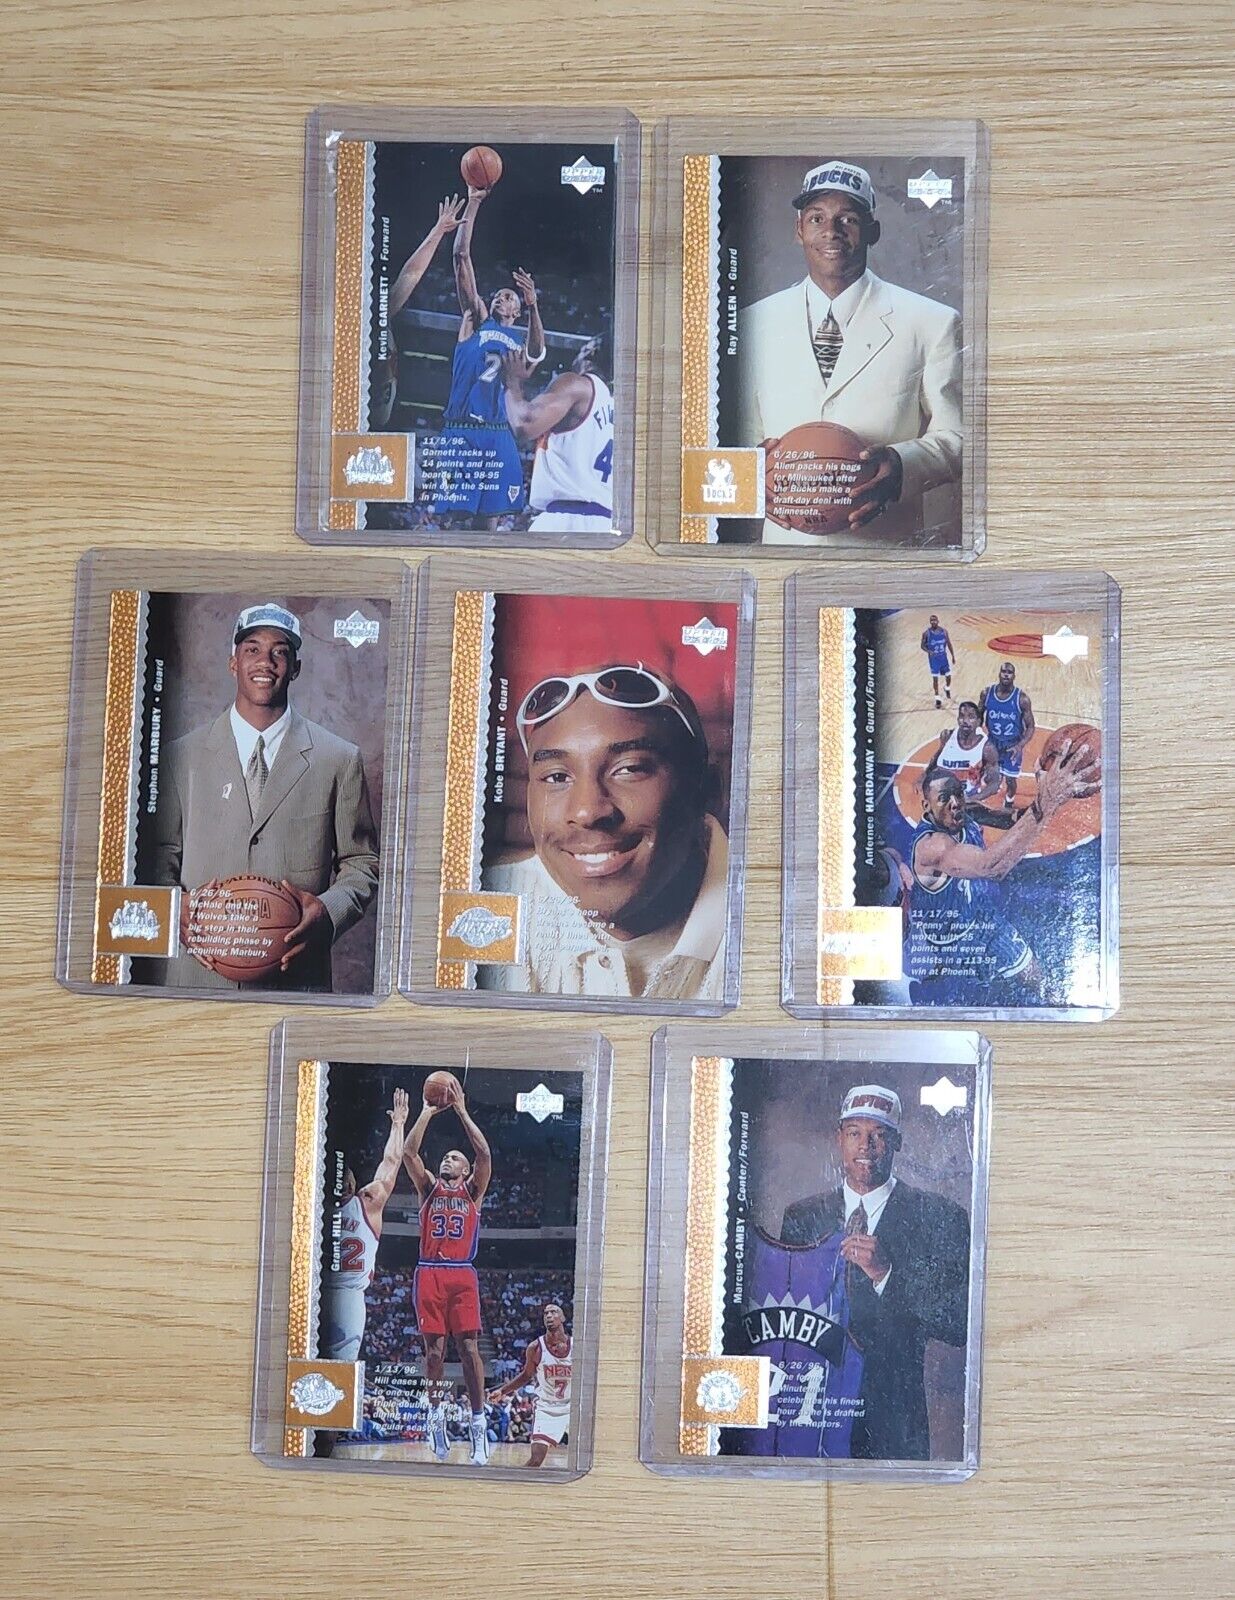 1996-1997 Upper Deck Lot of 7 including Kobe Bryant Rookie Card #58 